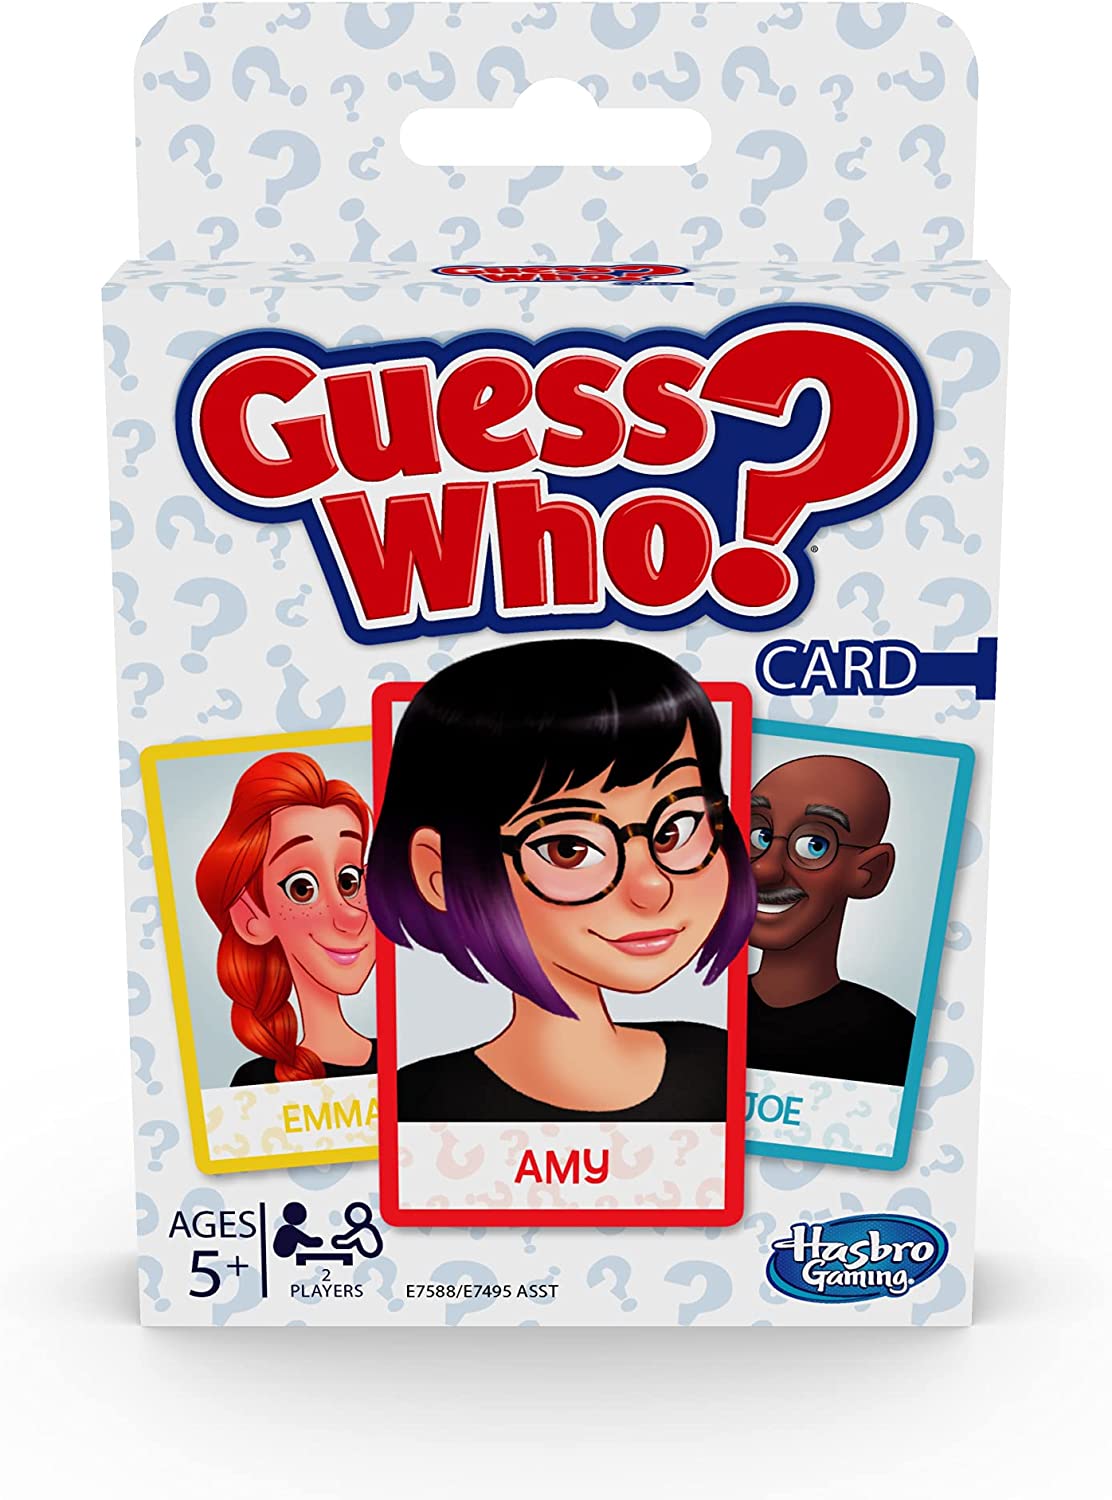 A card game box says Guess Who in red letters. Cards are shown that have pictures of cartoon people and their names.